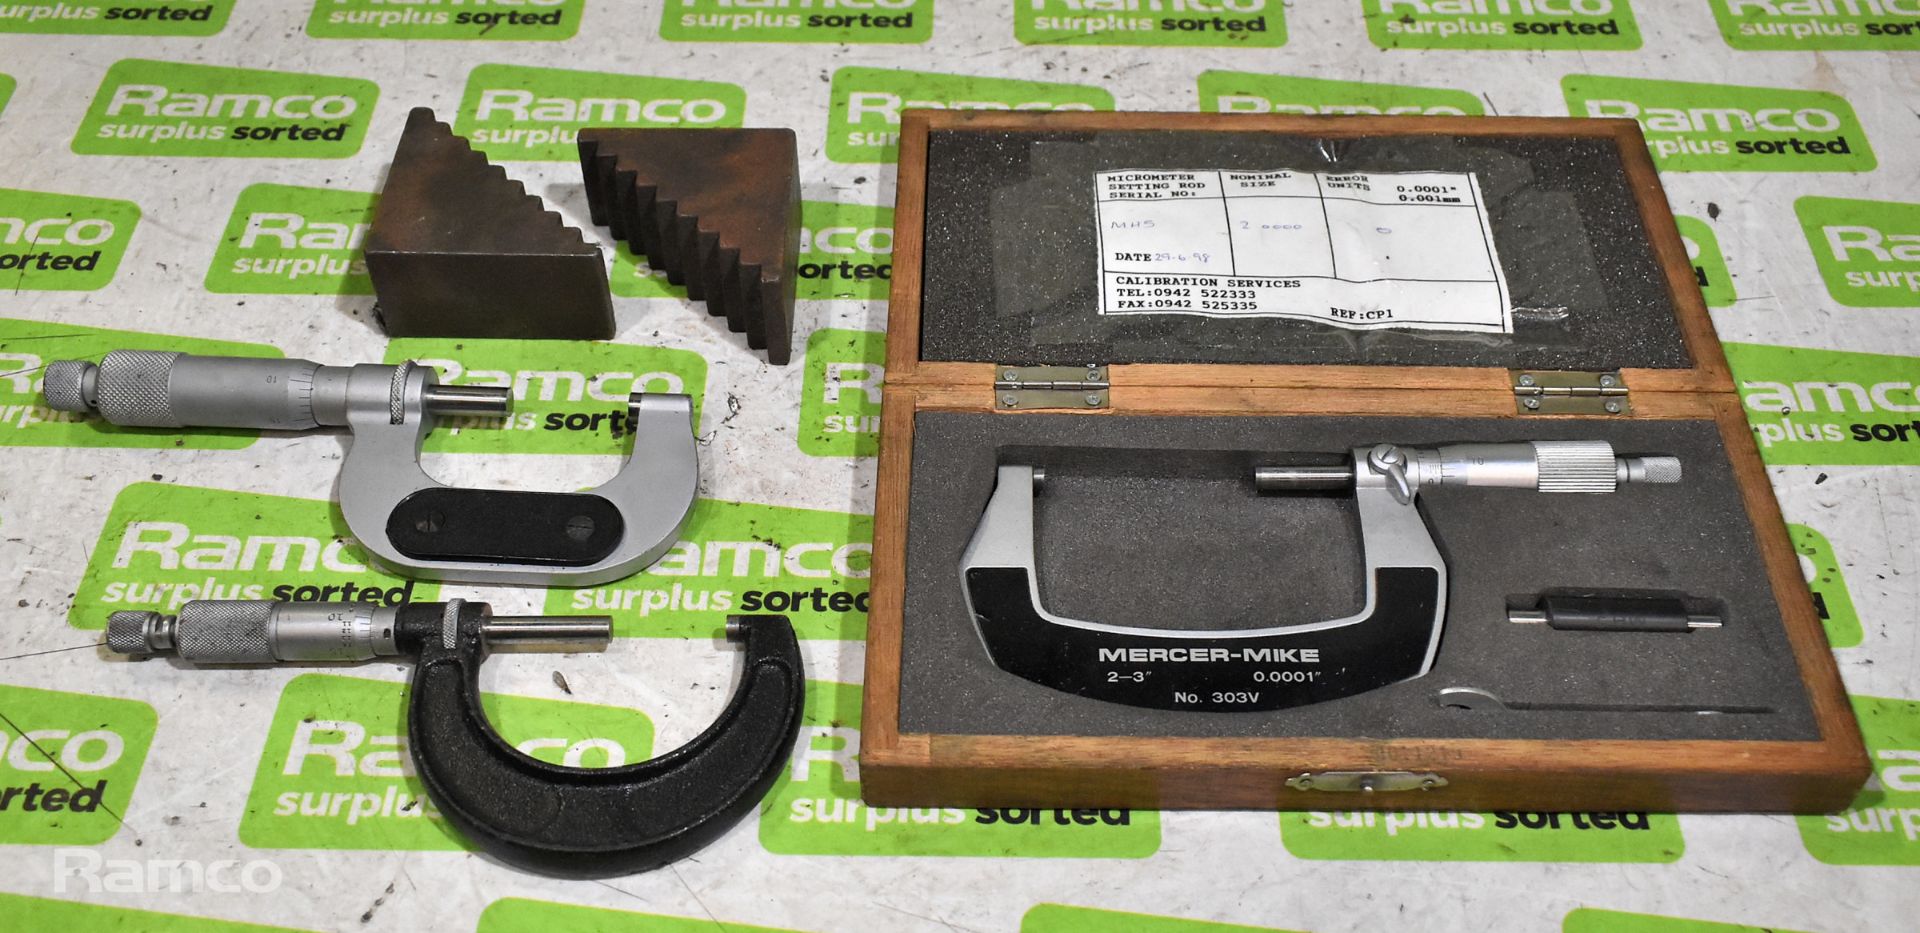 Assorted micrometers, number drills and letter drills - Image 4 of 11